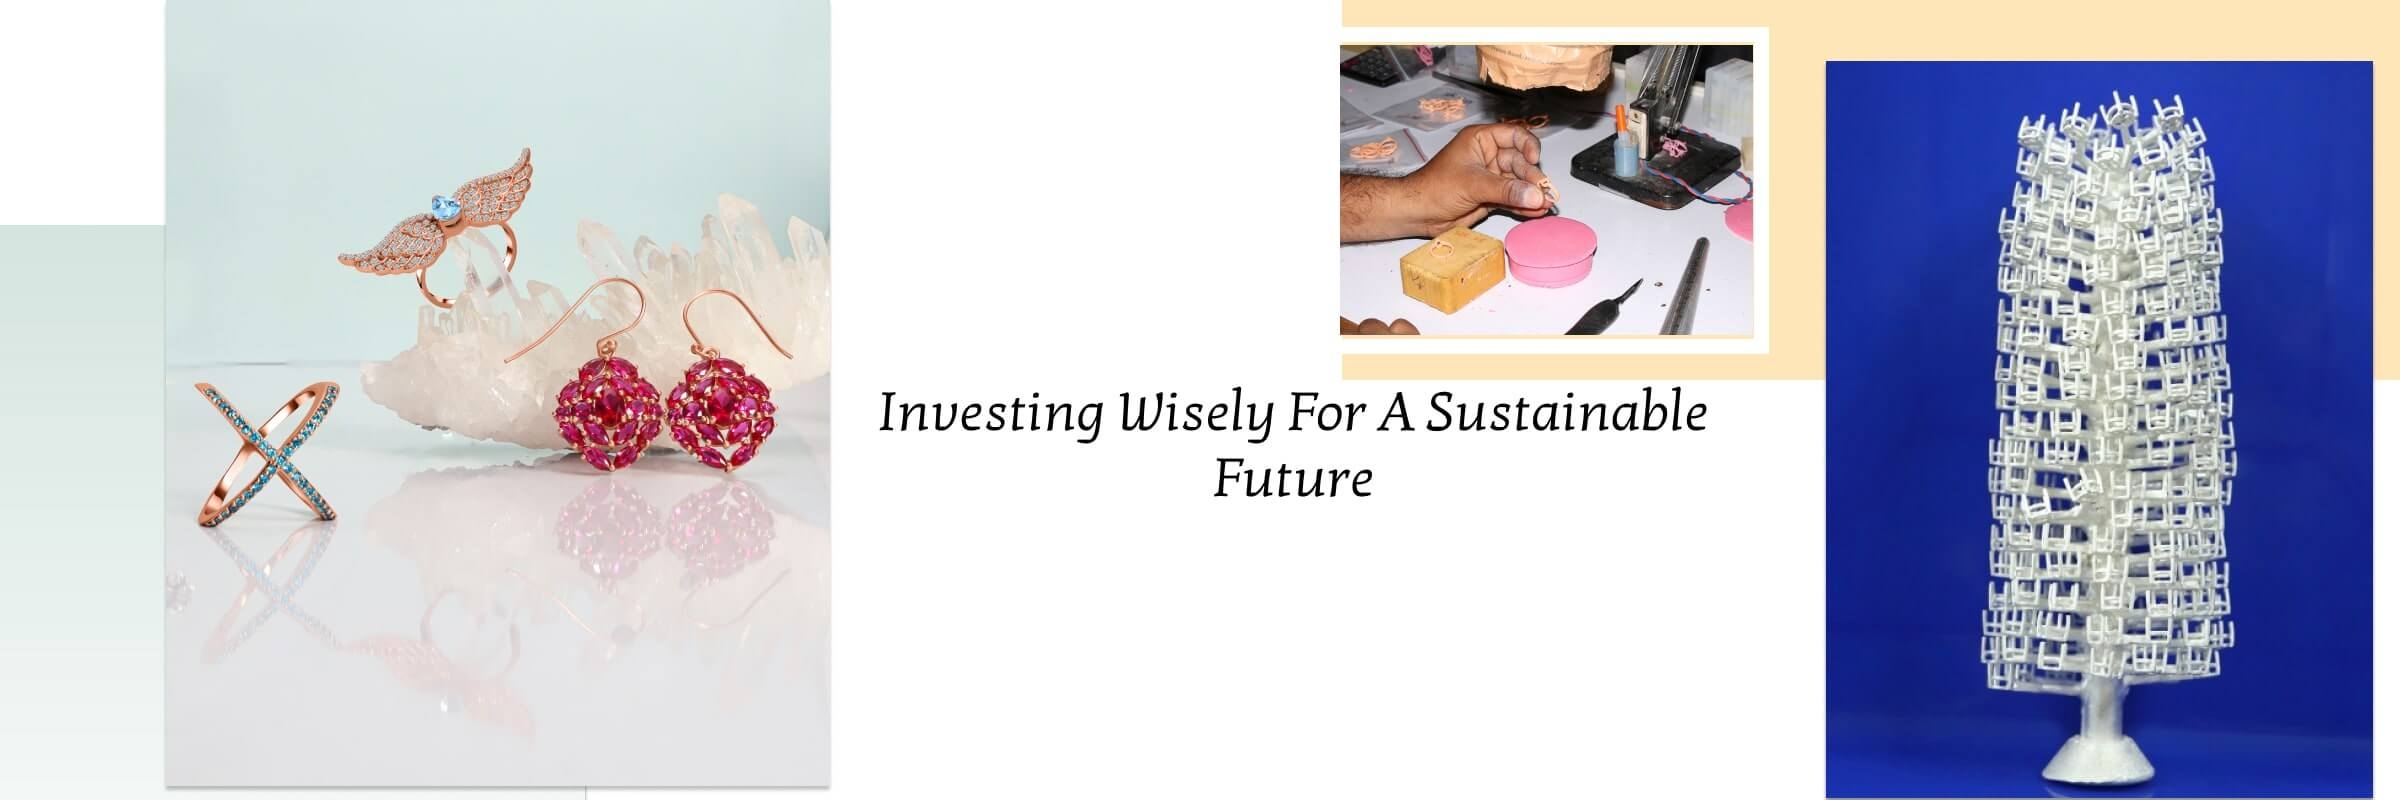 Investment and Sustainability